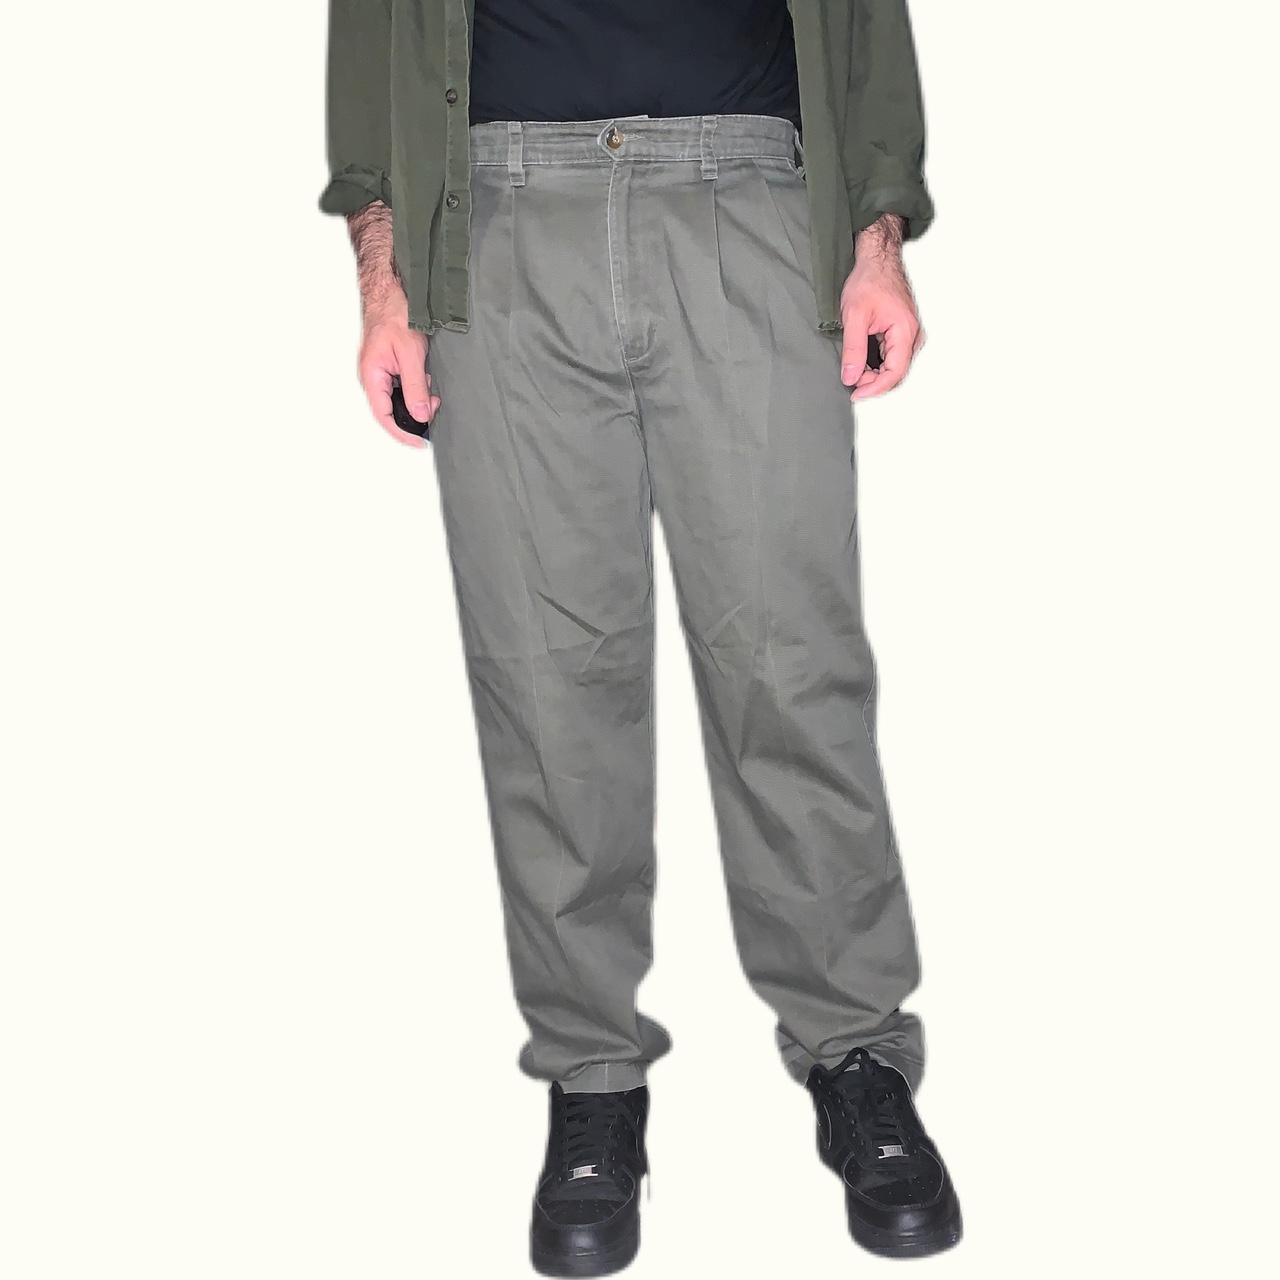 Product Image 1 - Vintage olive green dockers

Perfect pair